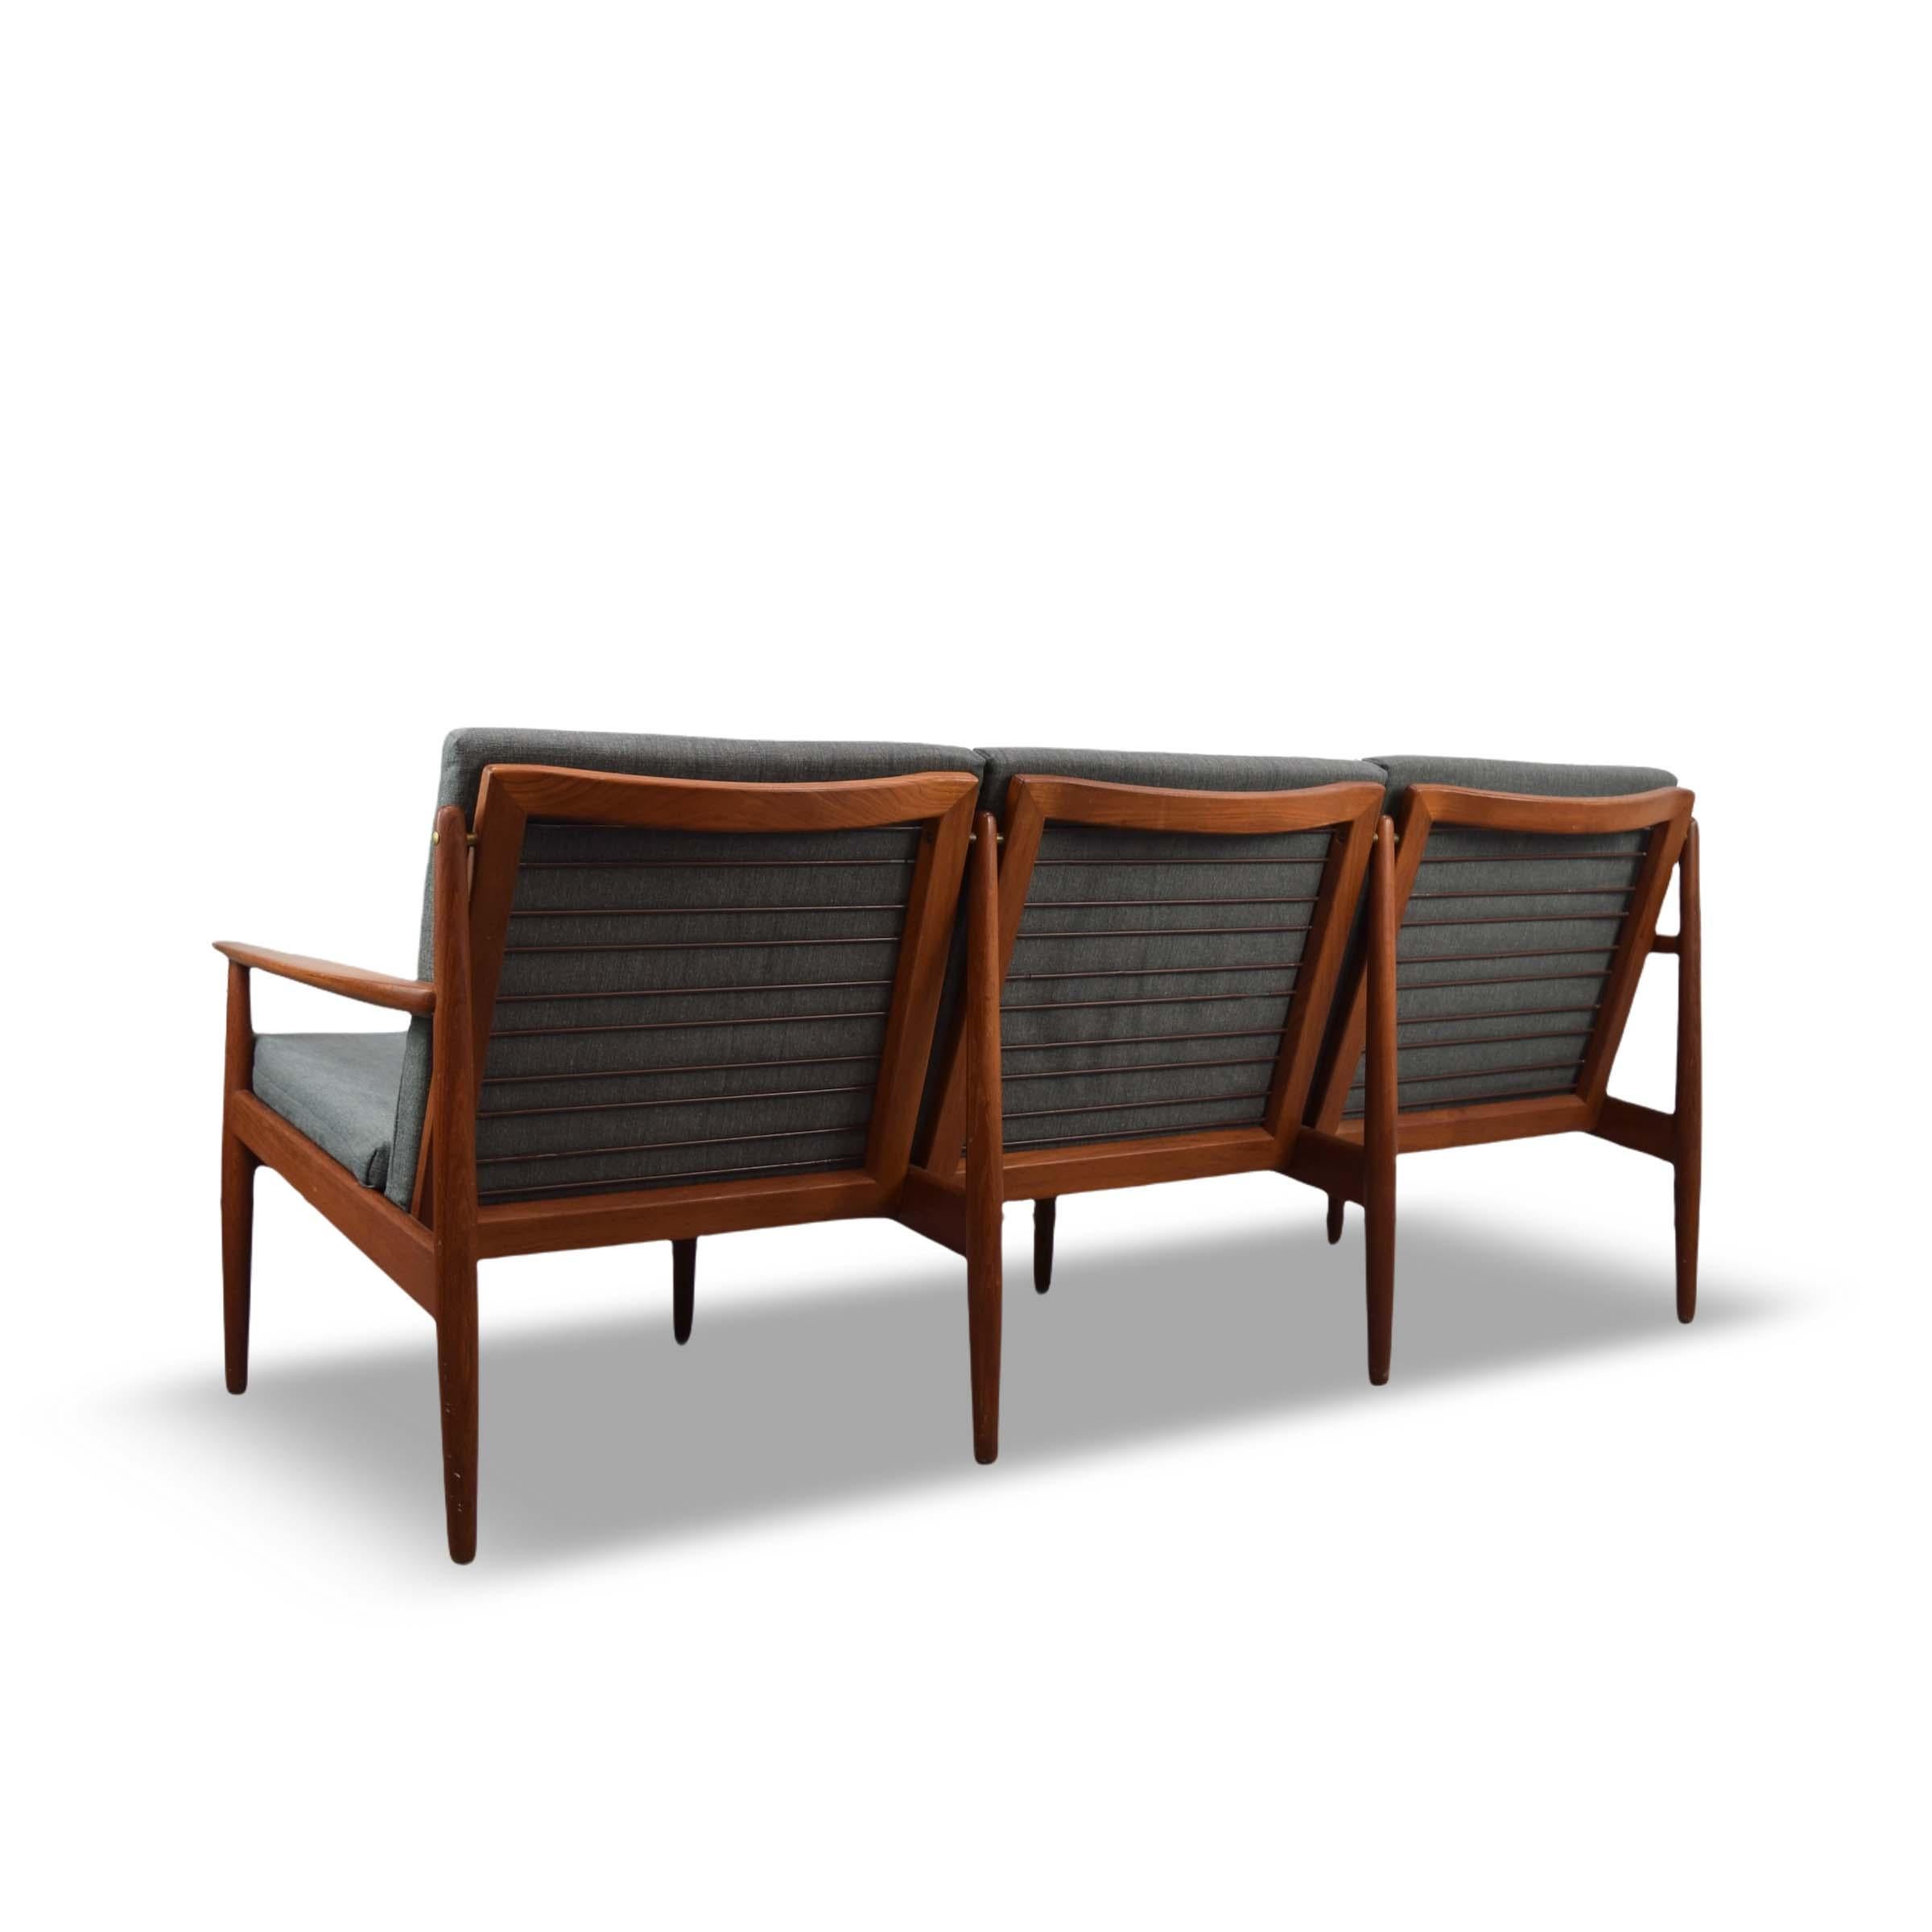 Designed by Arne Vodder and manufactured by Glostrup Møbelfabrick, circa 1960s (stamped). All seat cords are present and in good condition. Comfortable and elegant design. 

Recently reupholstered. Reupholstery and refinishing can be arranged to